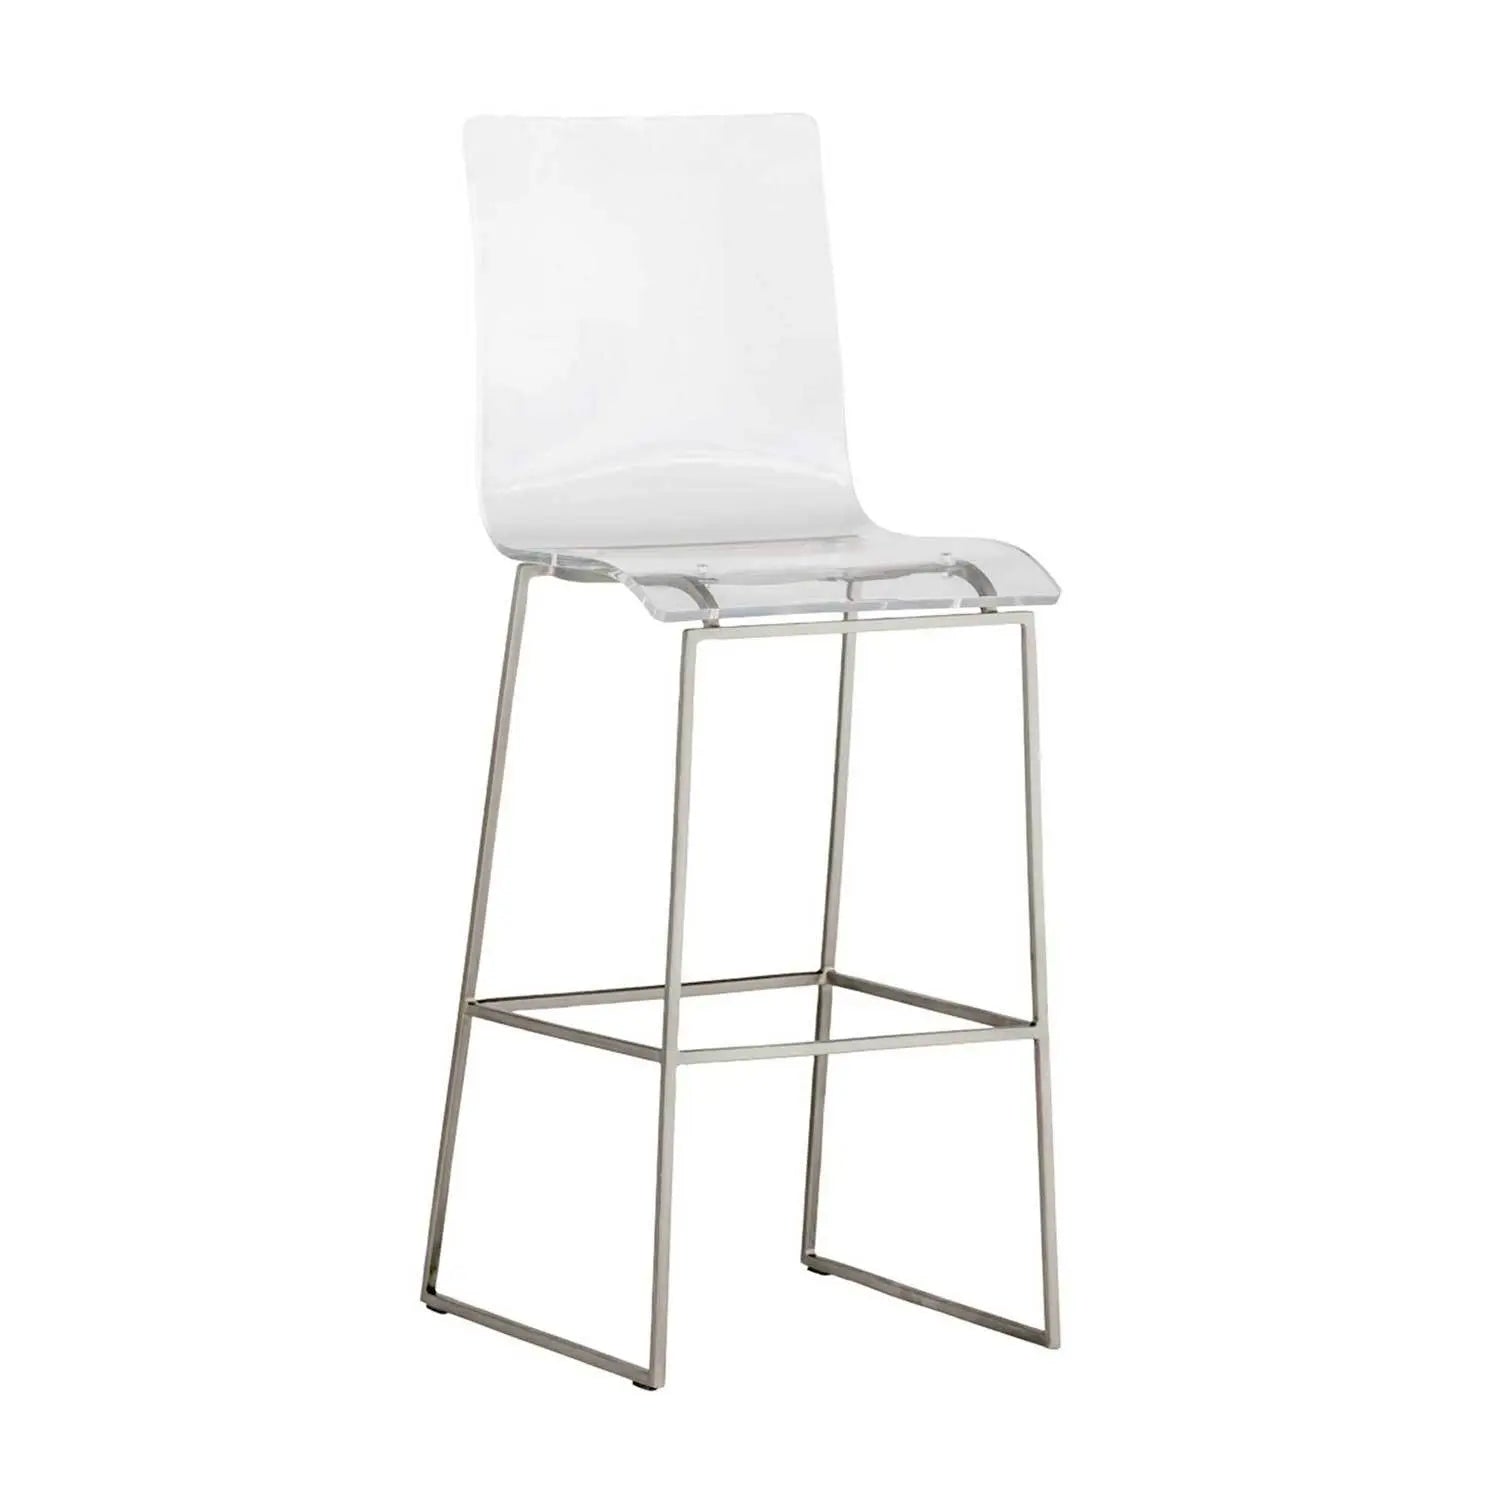 Gabby King Counter Height Stool in Chrome